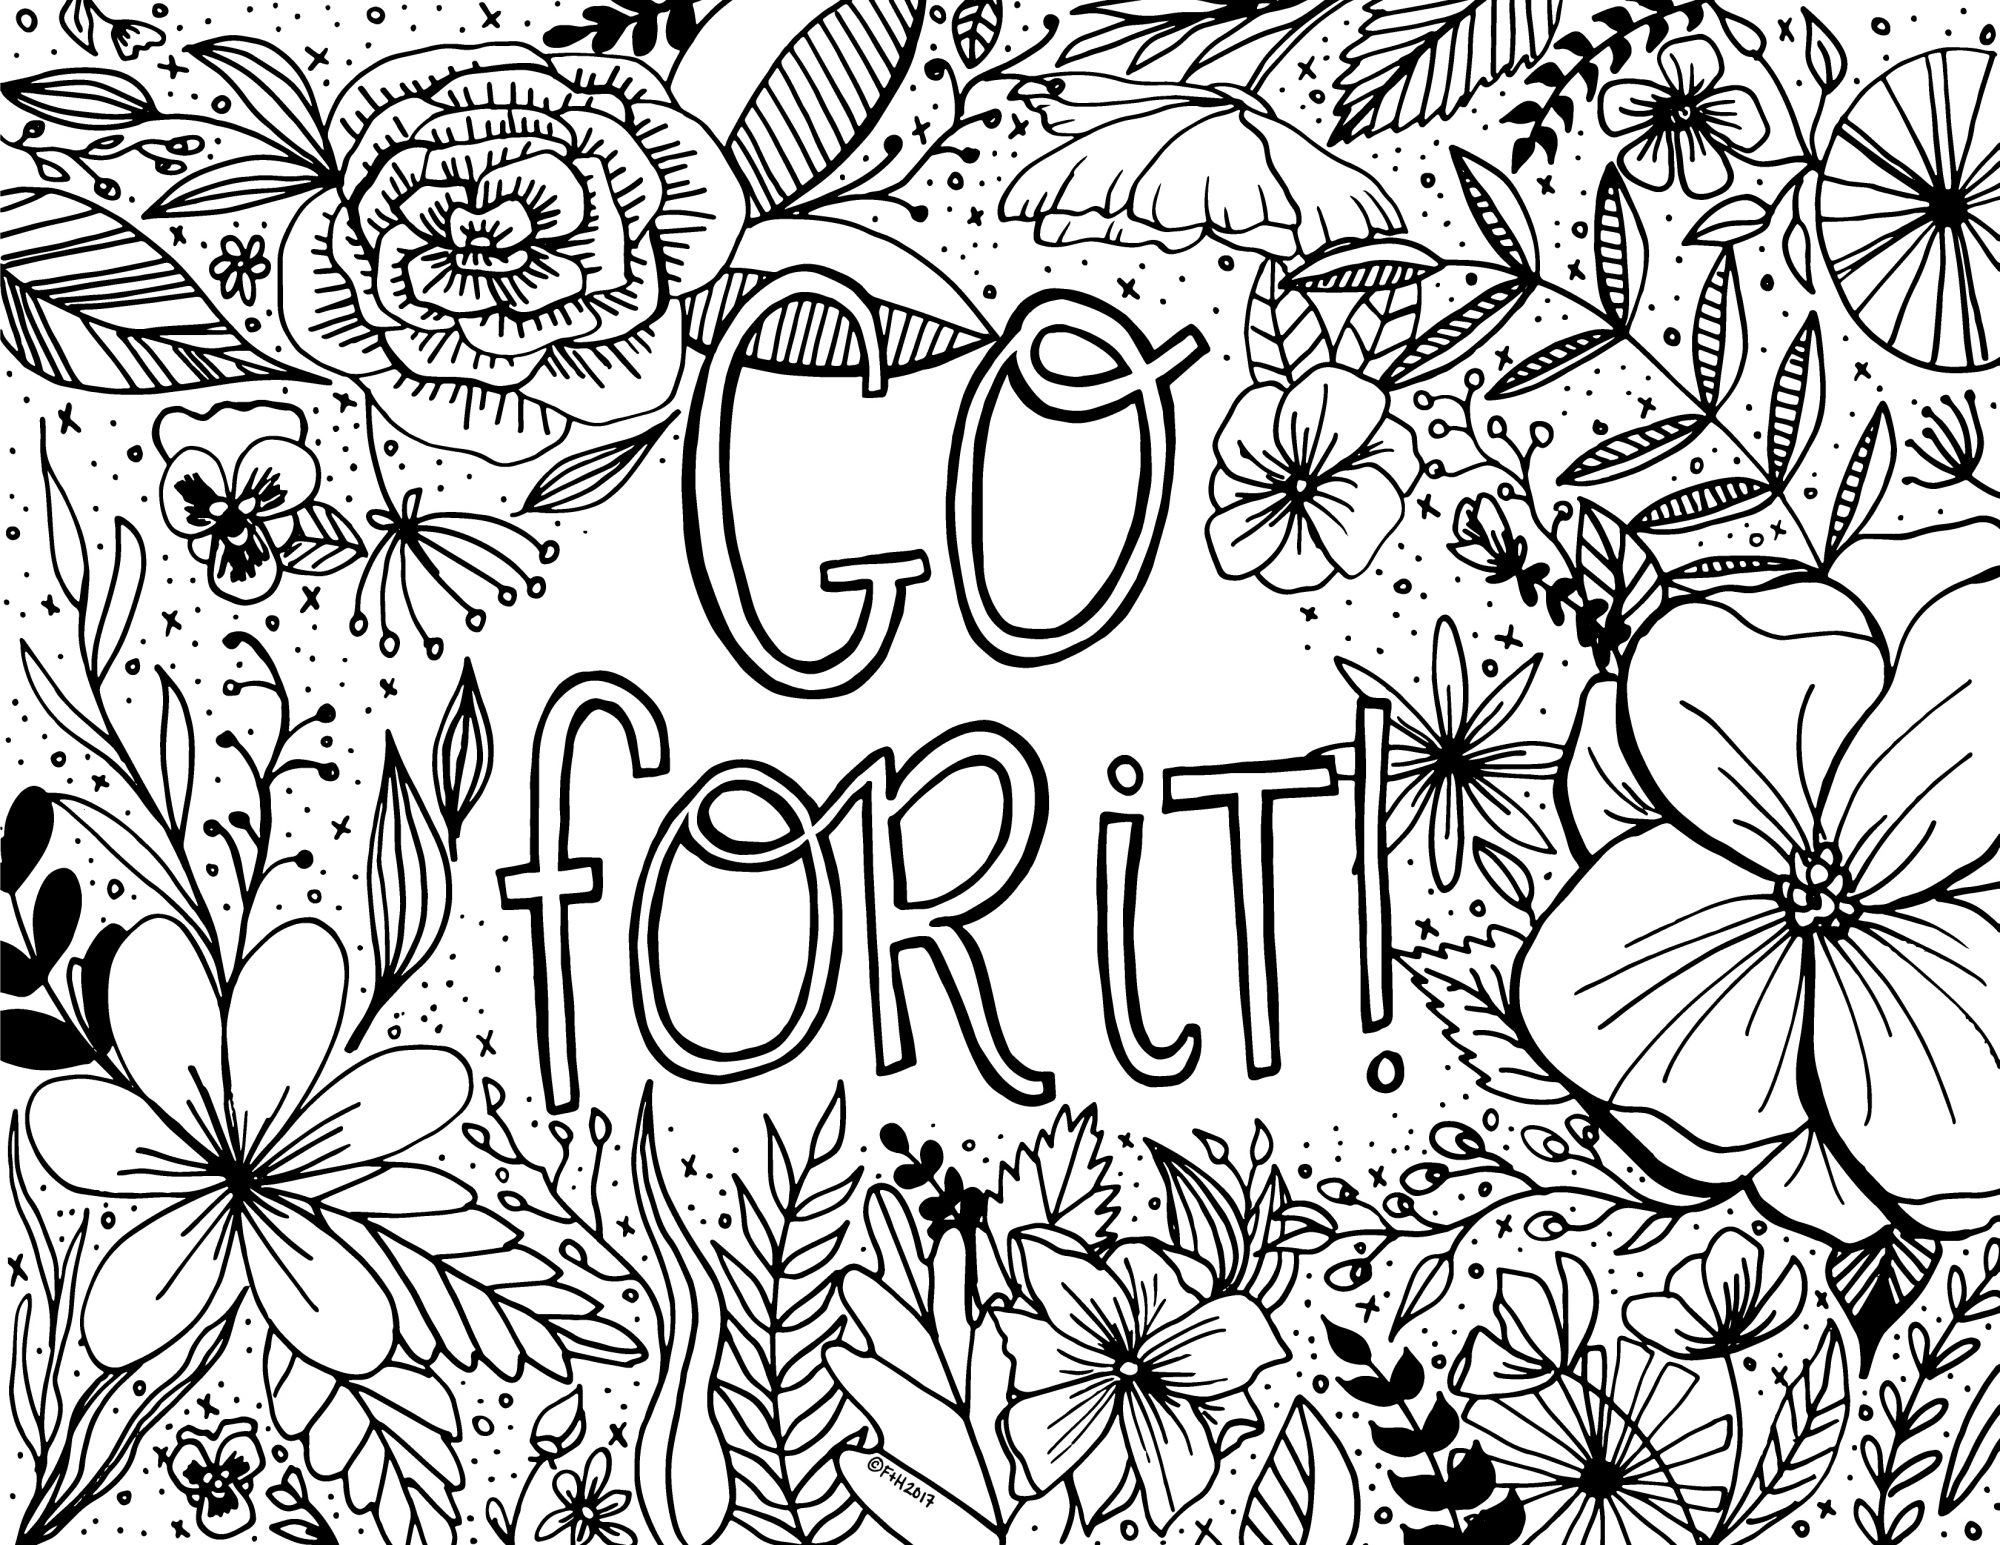 Coloring Pages : Printable Coloring Pictures Free Encouragement Page - Free Printable Coloring Pages